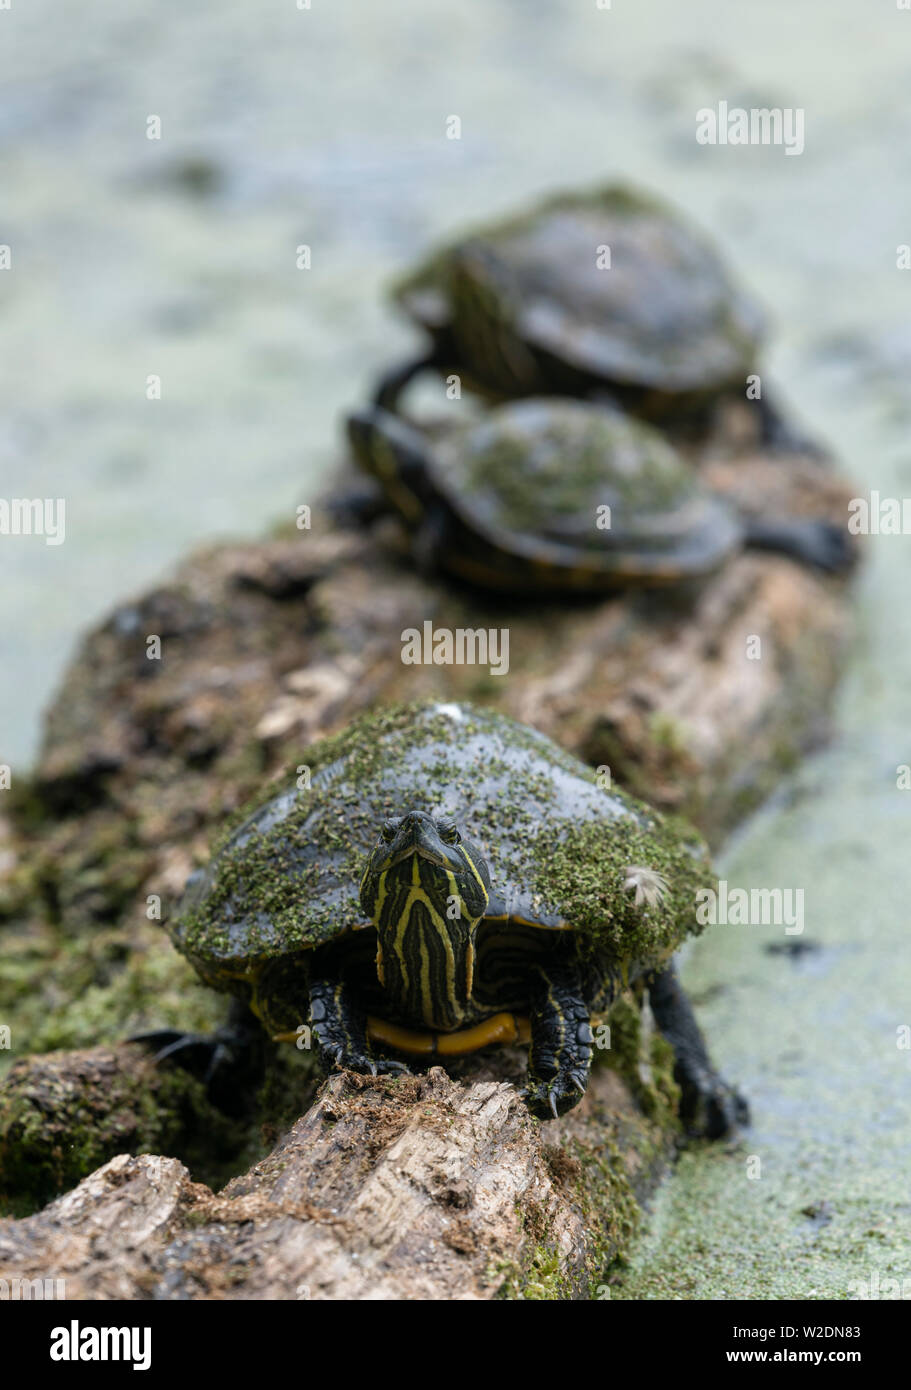 Red-Eared Terrapins basking on a partially submerged log in a lake in a park in Blackpool, UK. Probably released from captivity Stock Photo